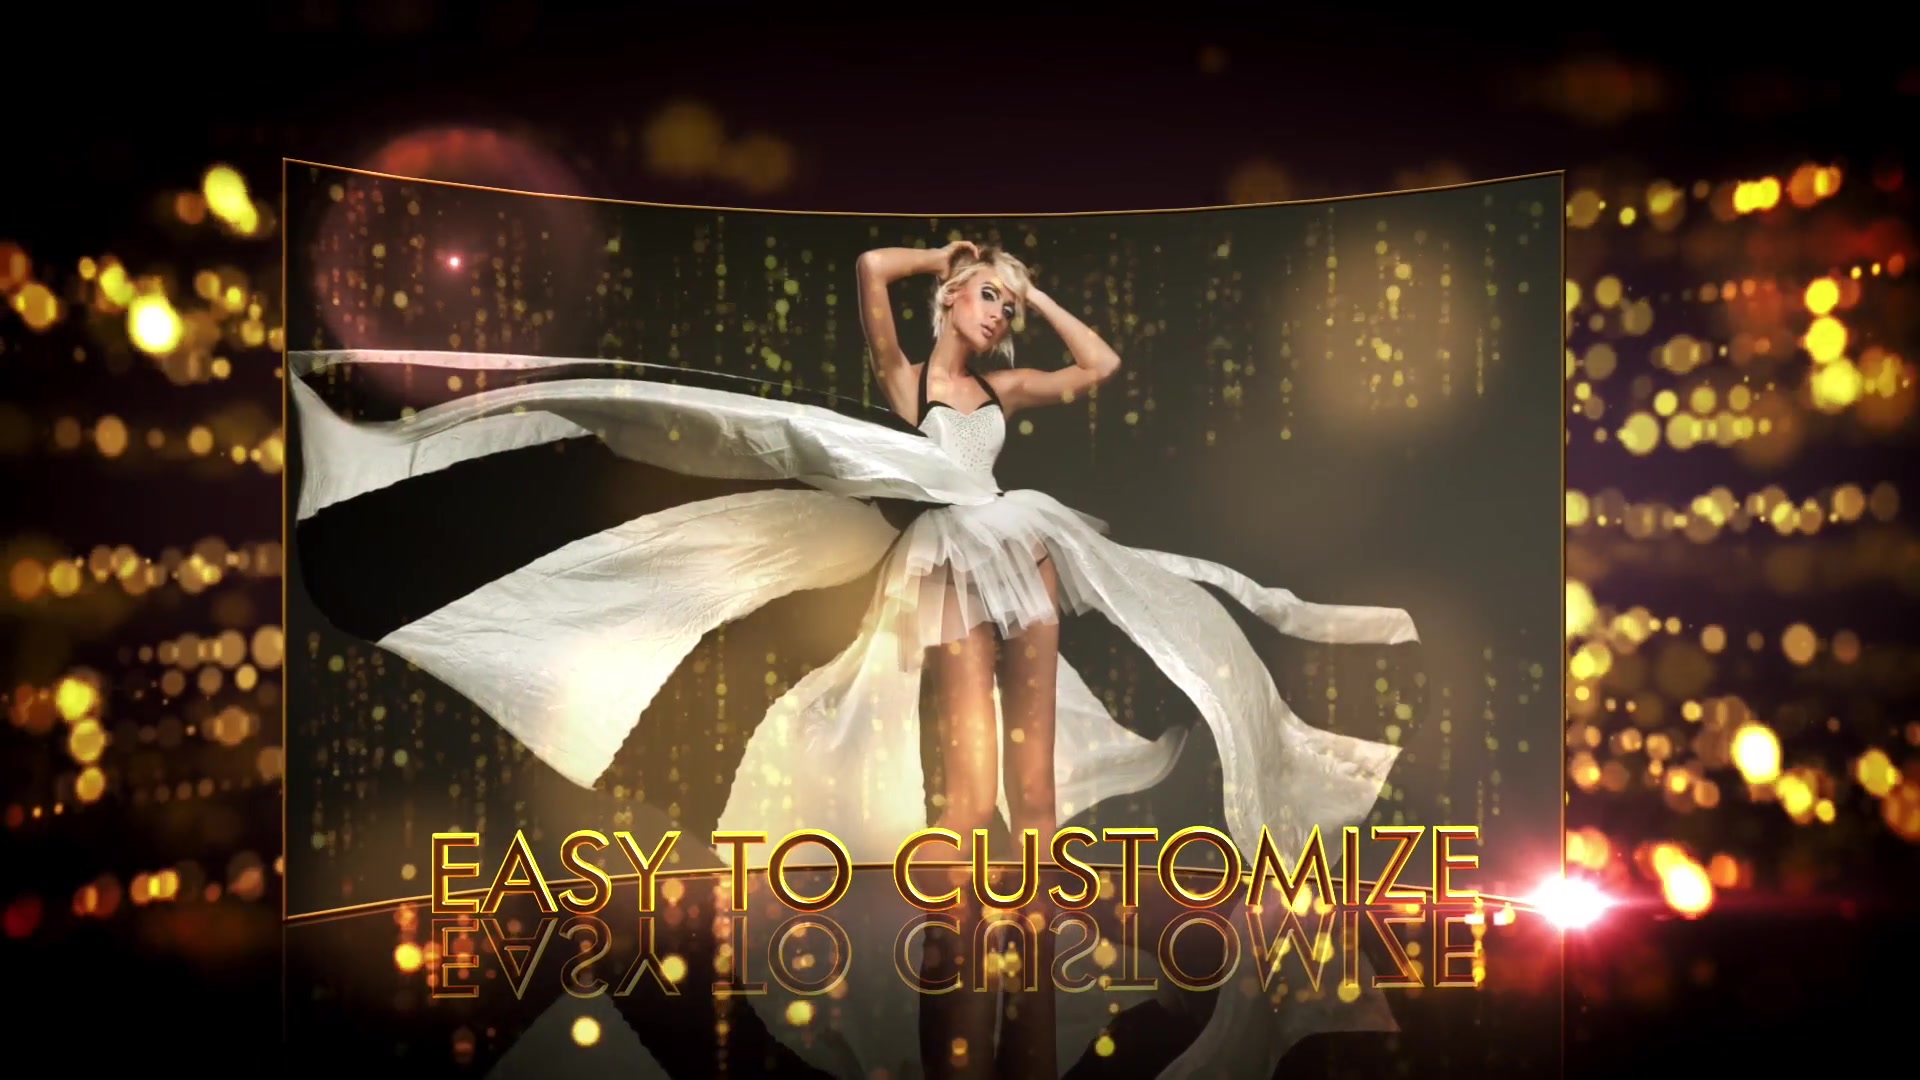 Fashion Focus Apple Motion - Download Videohive 23323793